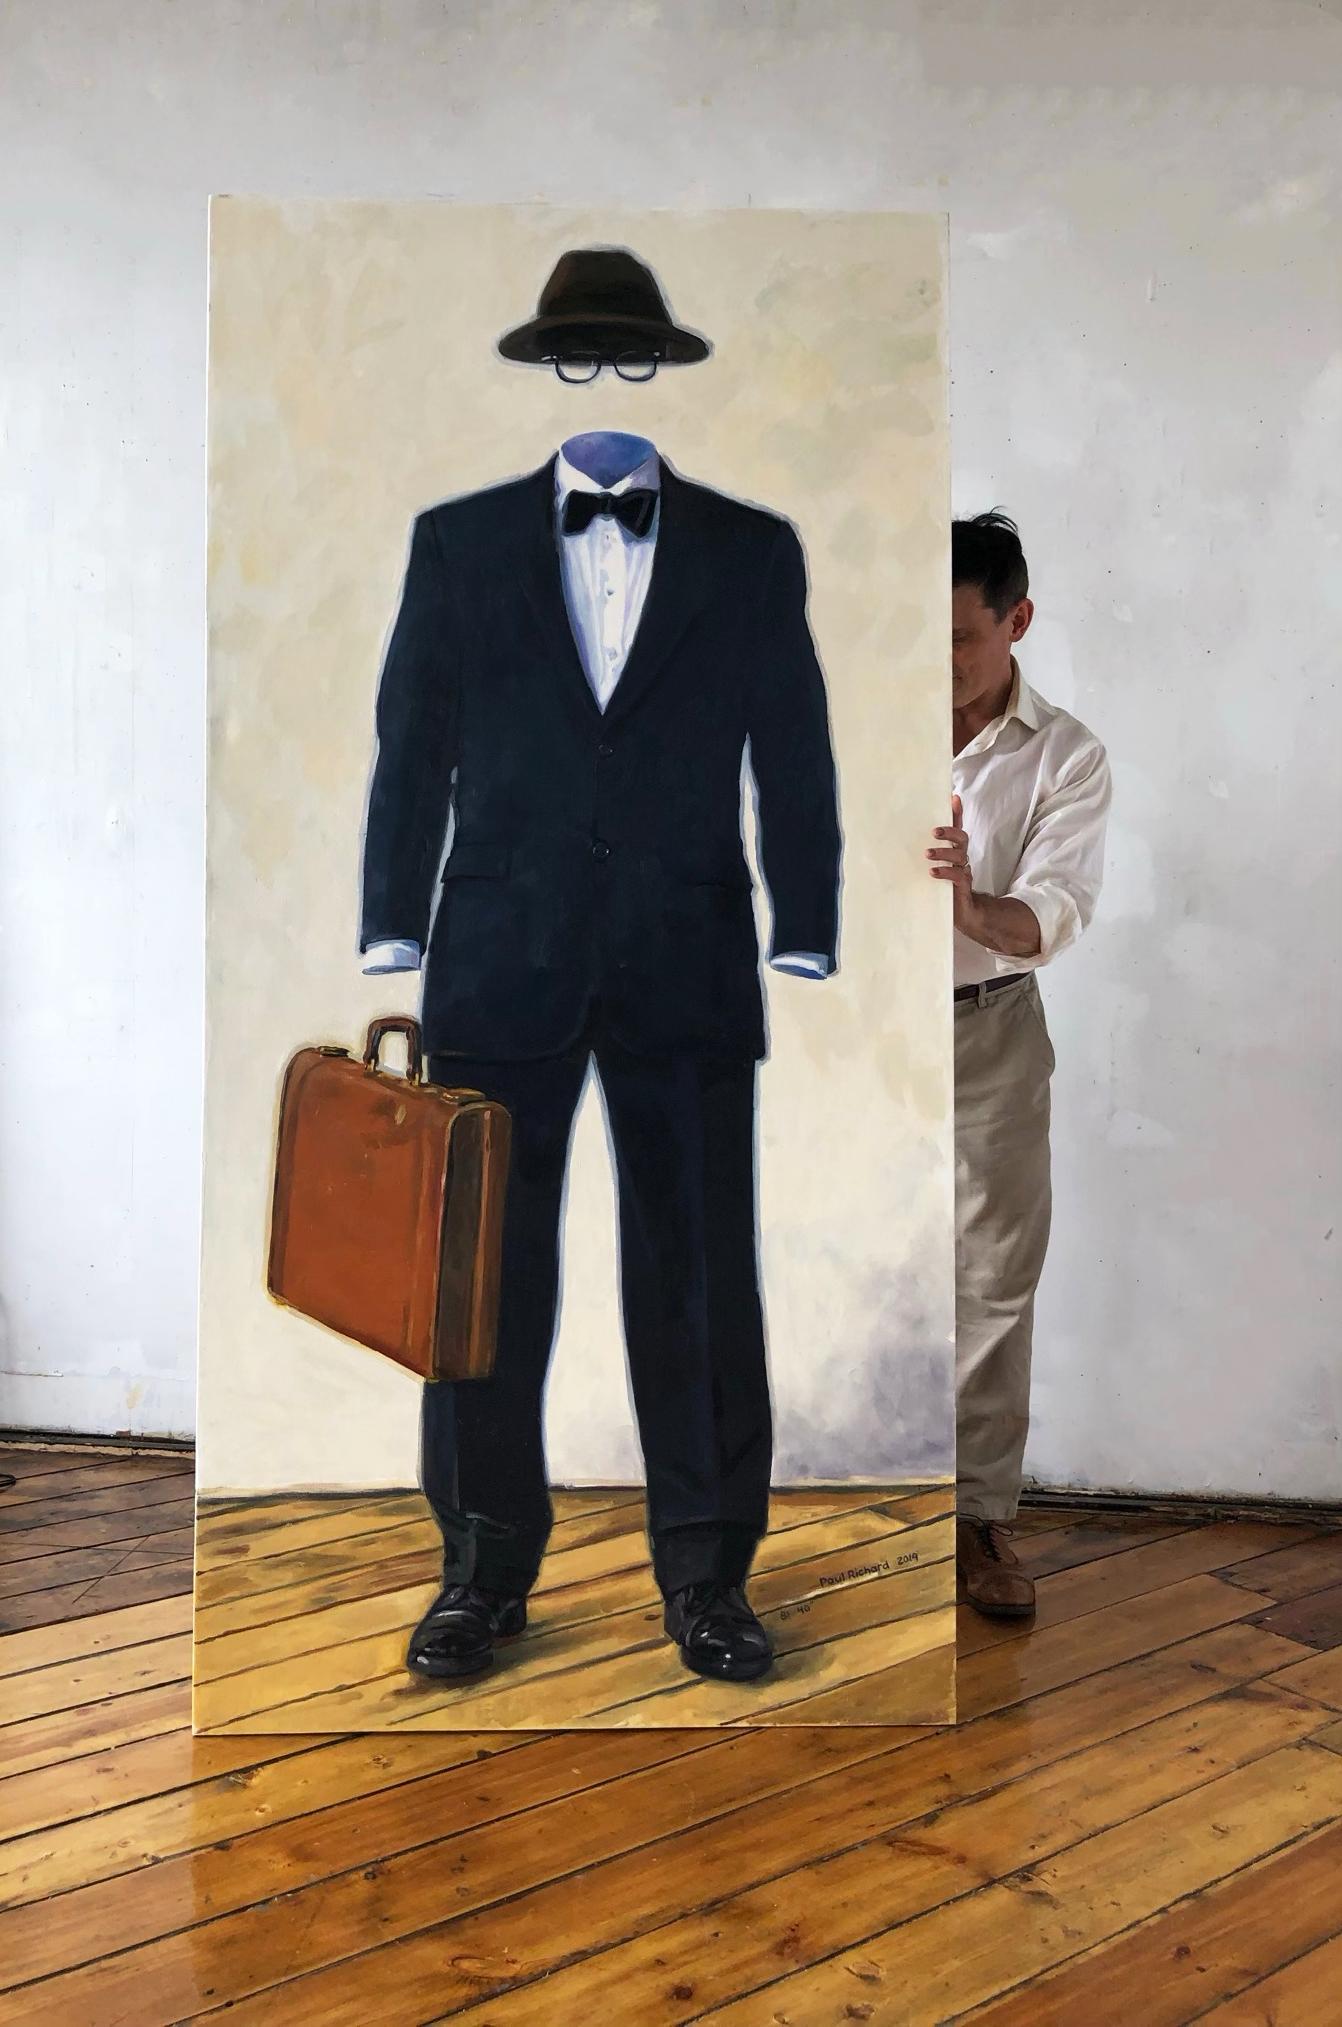 Invisible Man - Painting by Paul Richard